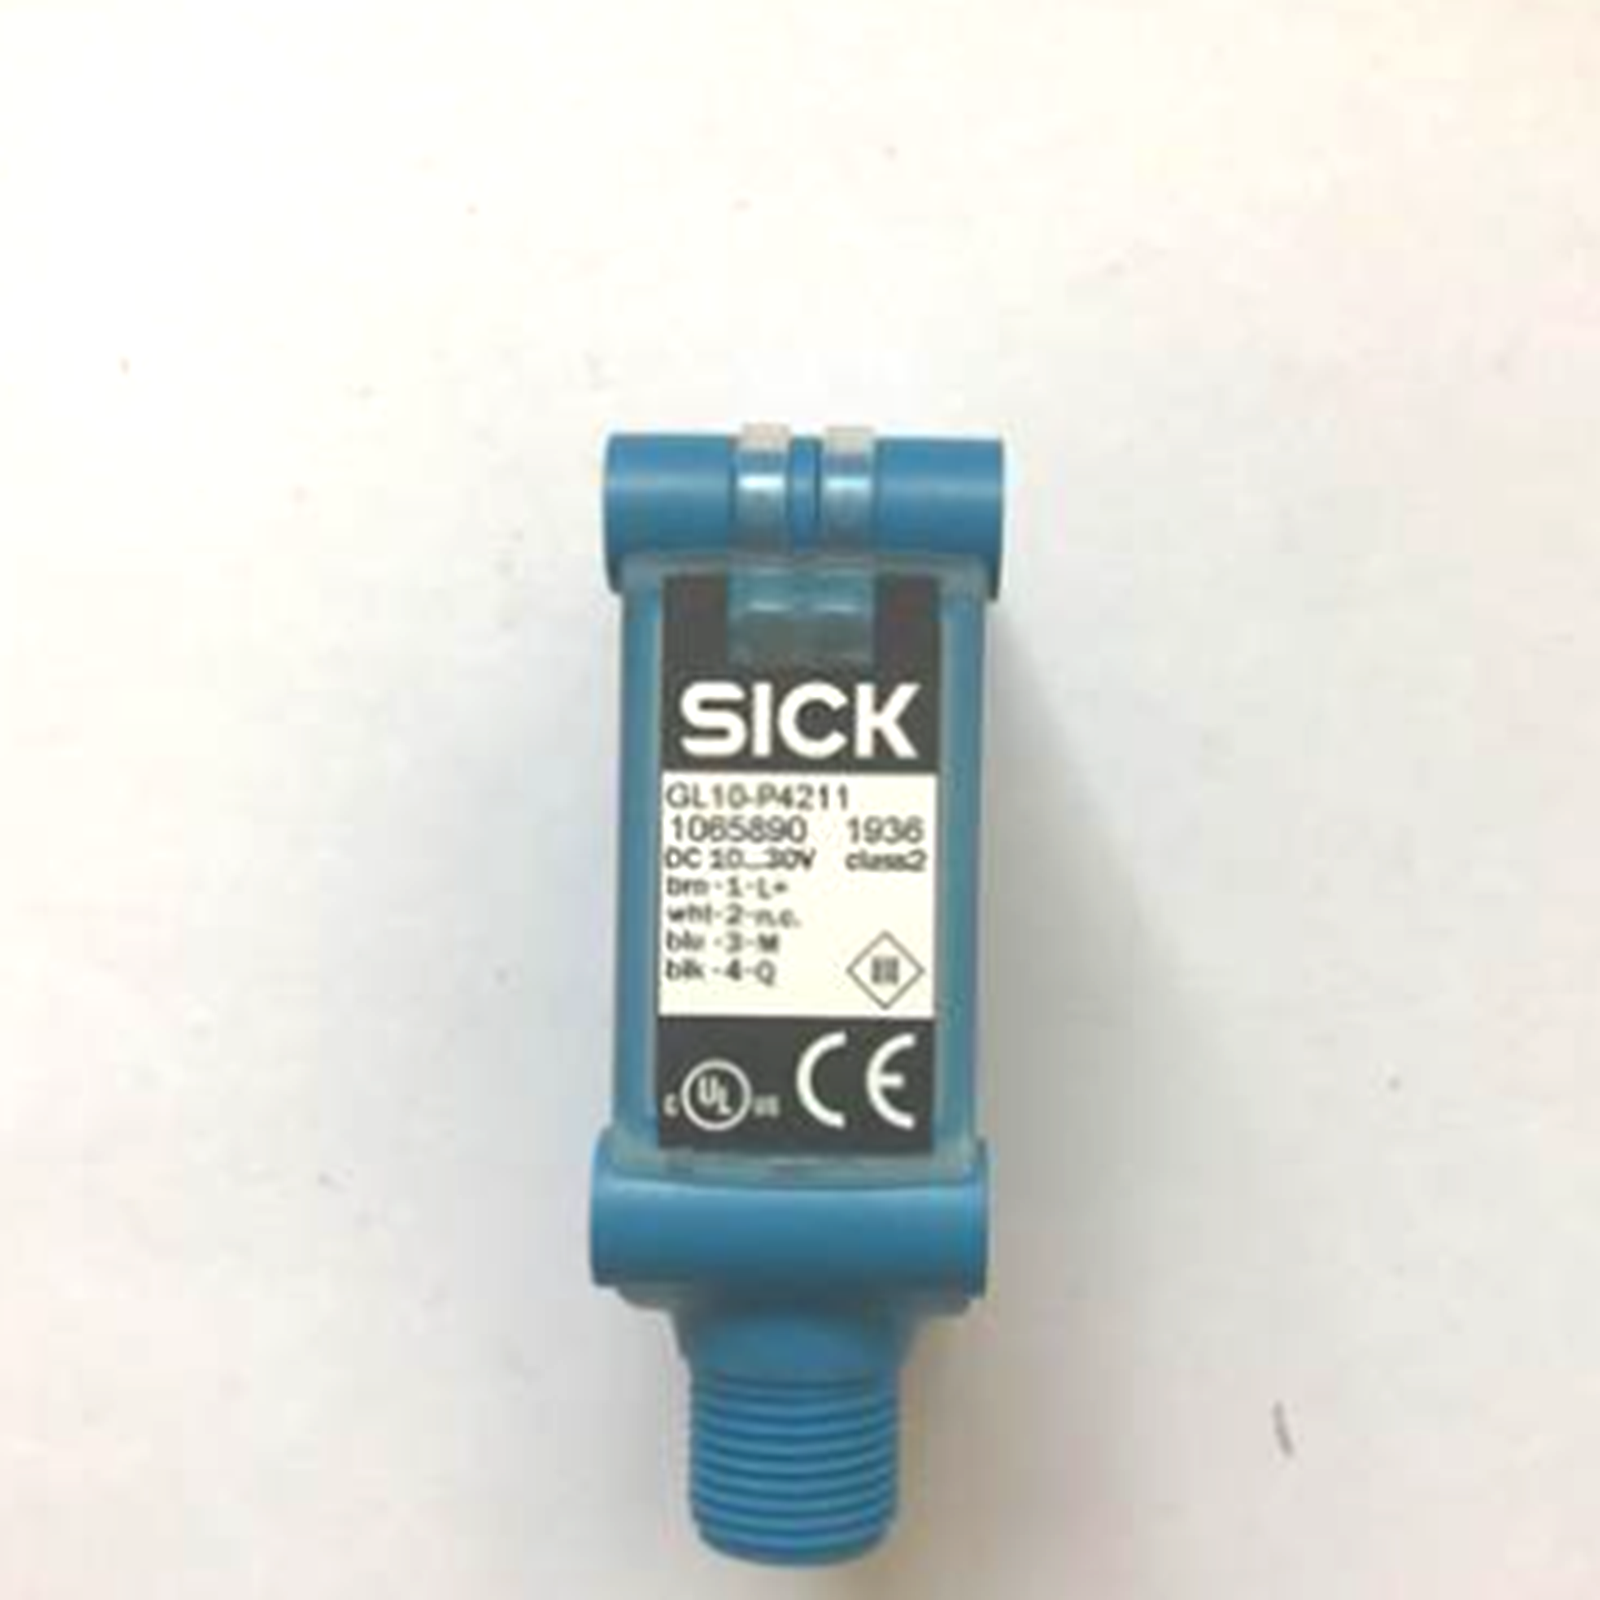 SICK GL10-P4211 Photoelectric Switch